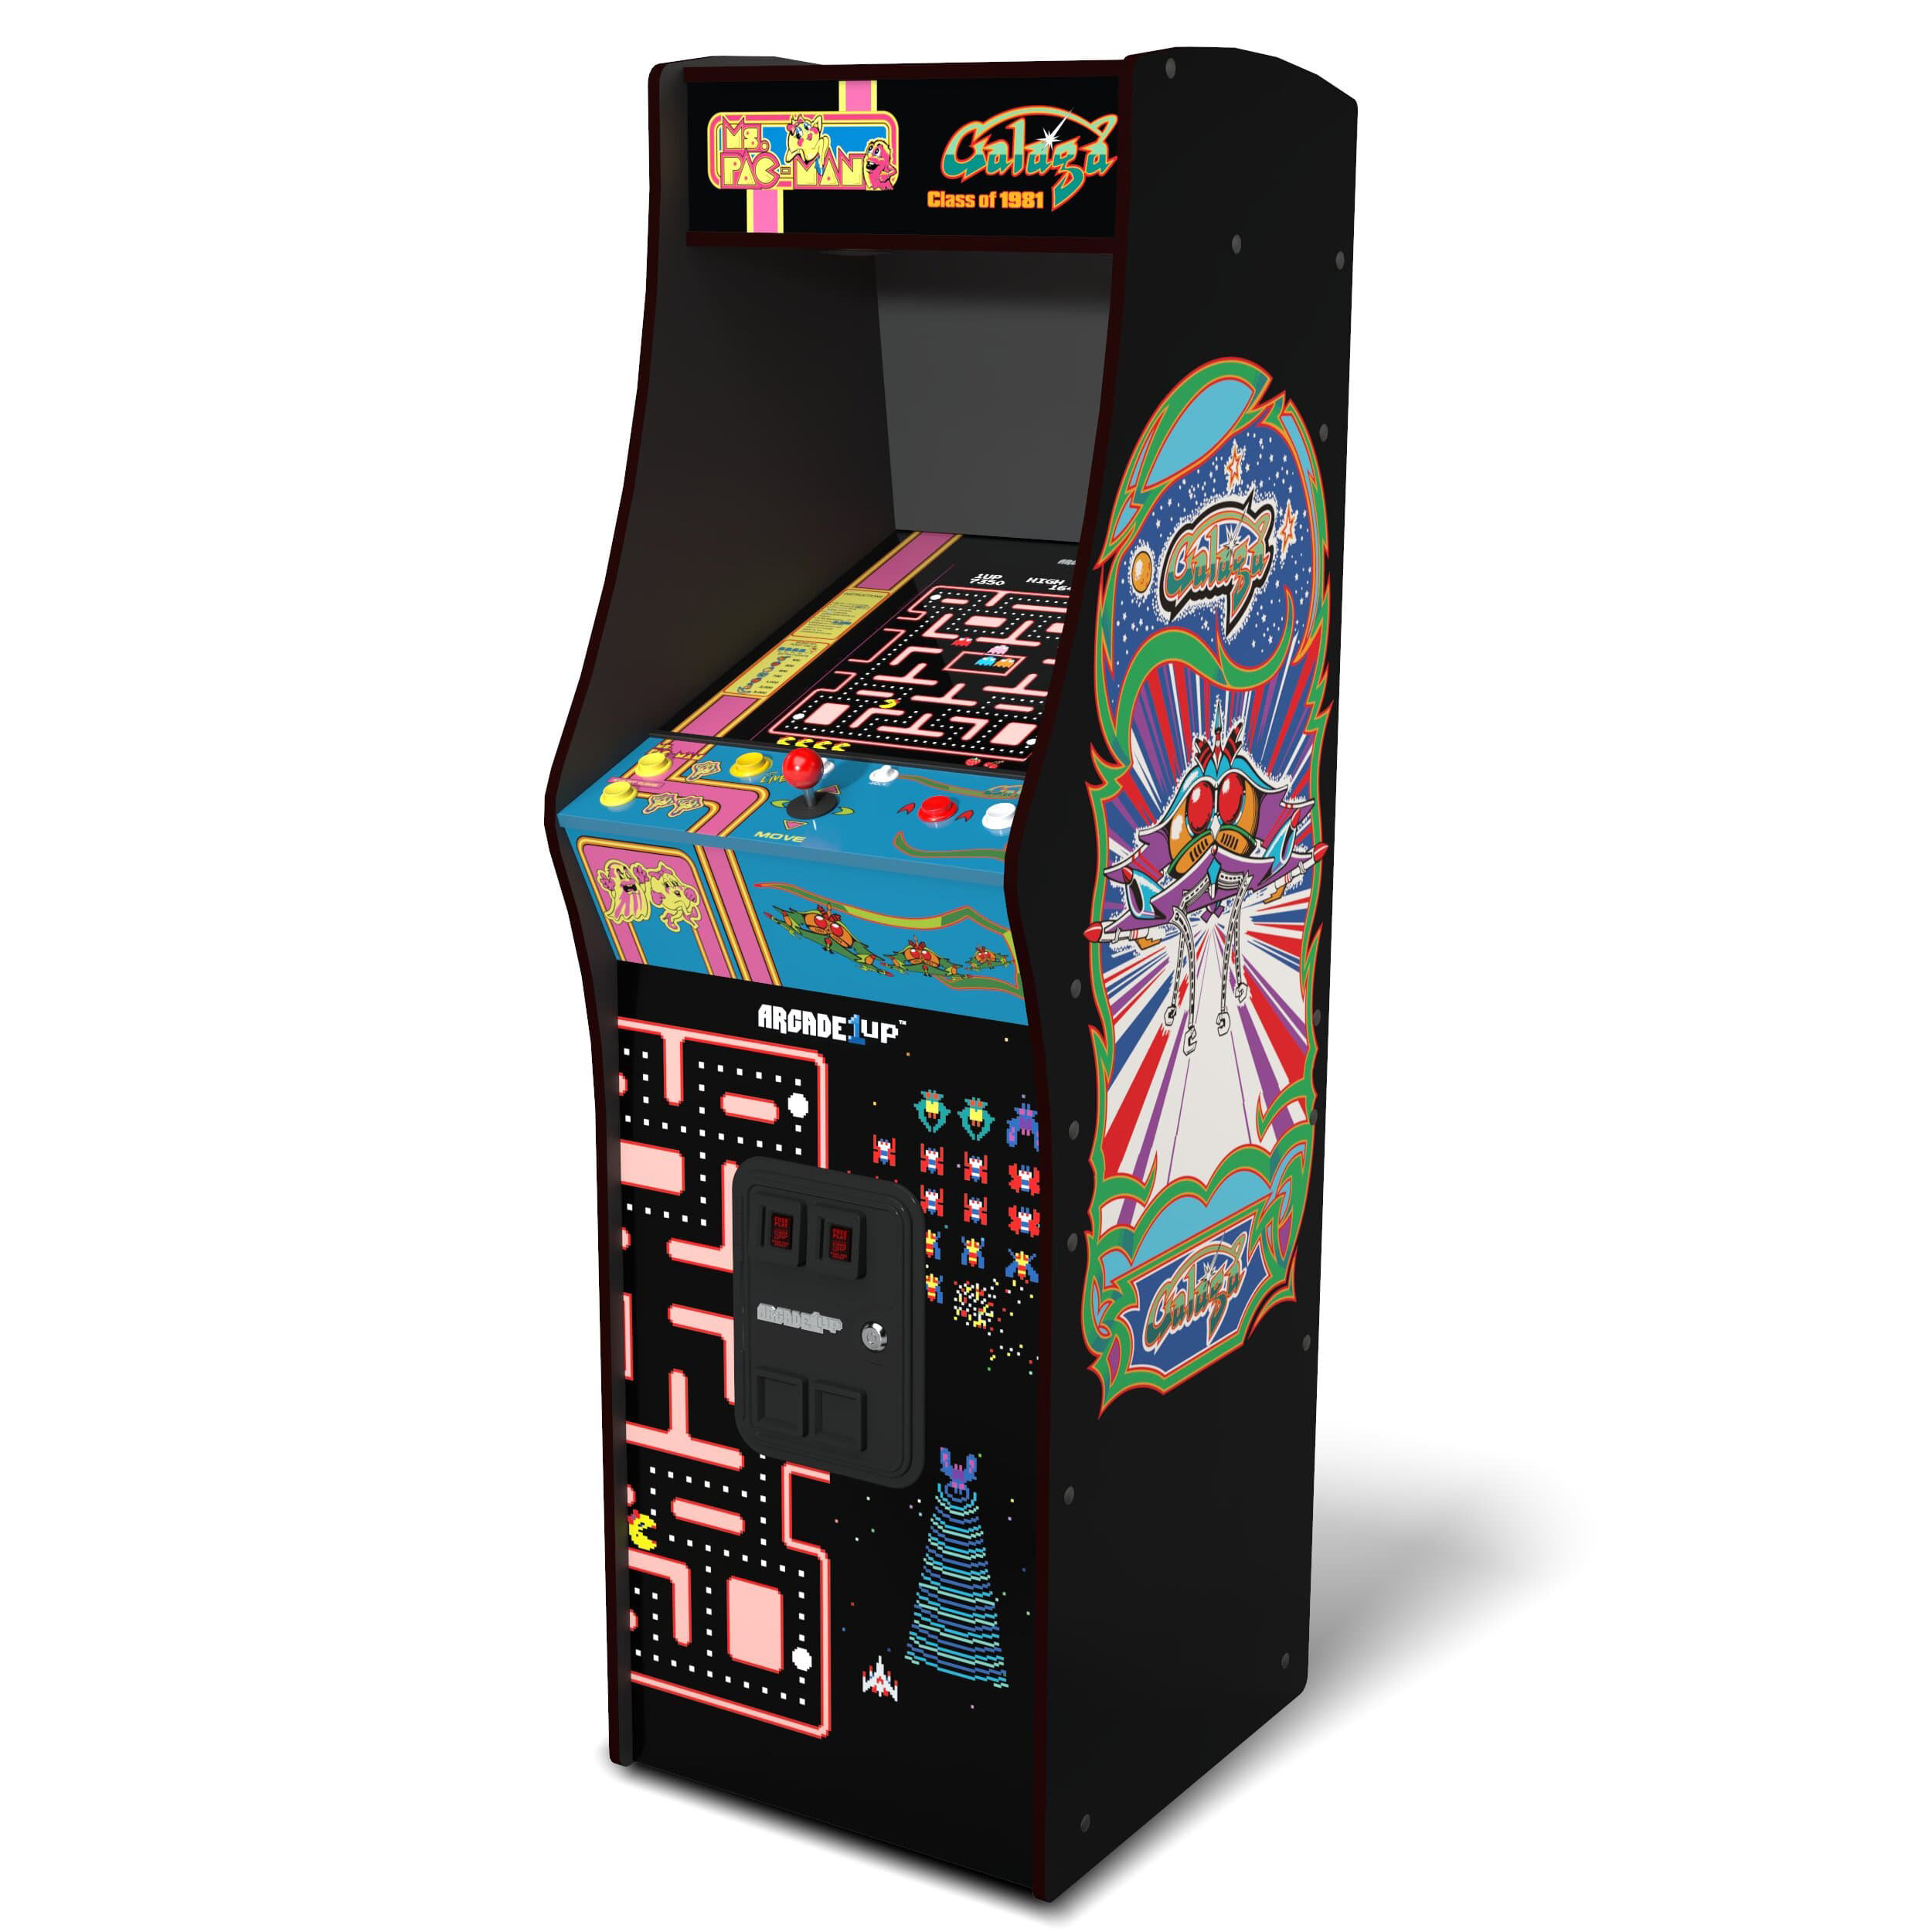 Arcade1Up To Now Offer A 'Wheel of Fortune' CasinoCade